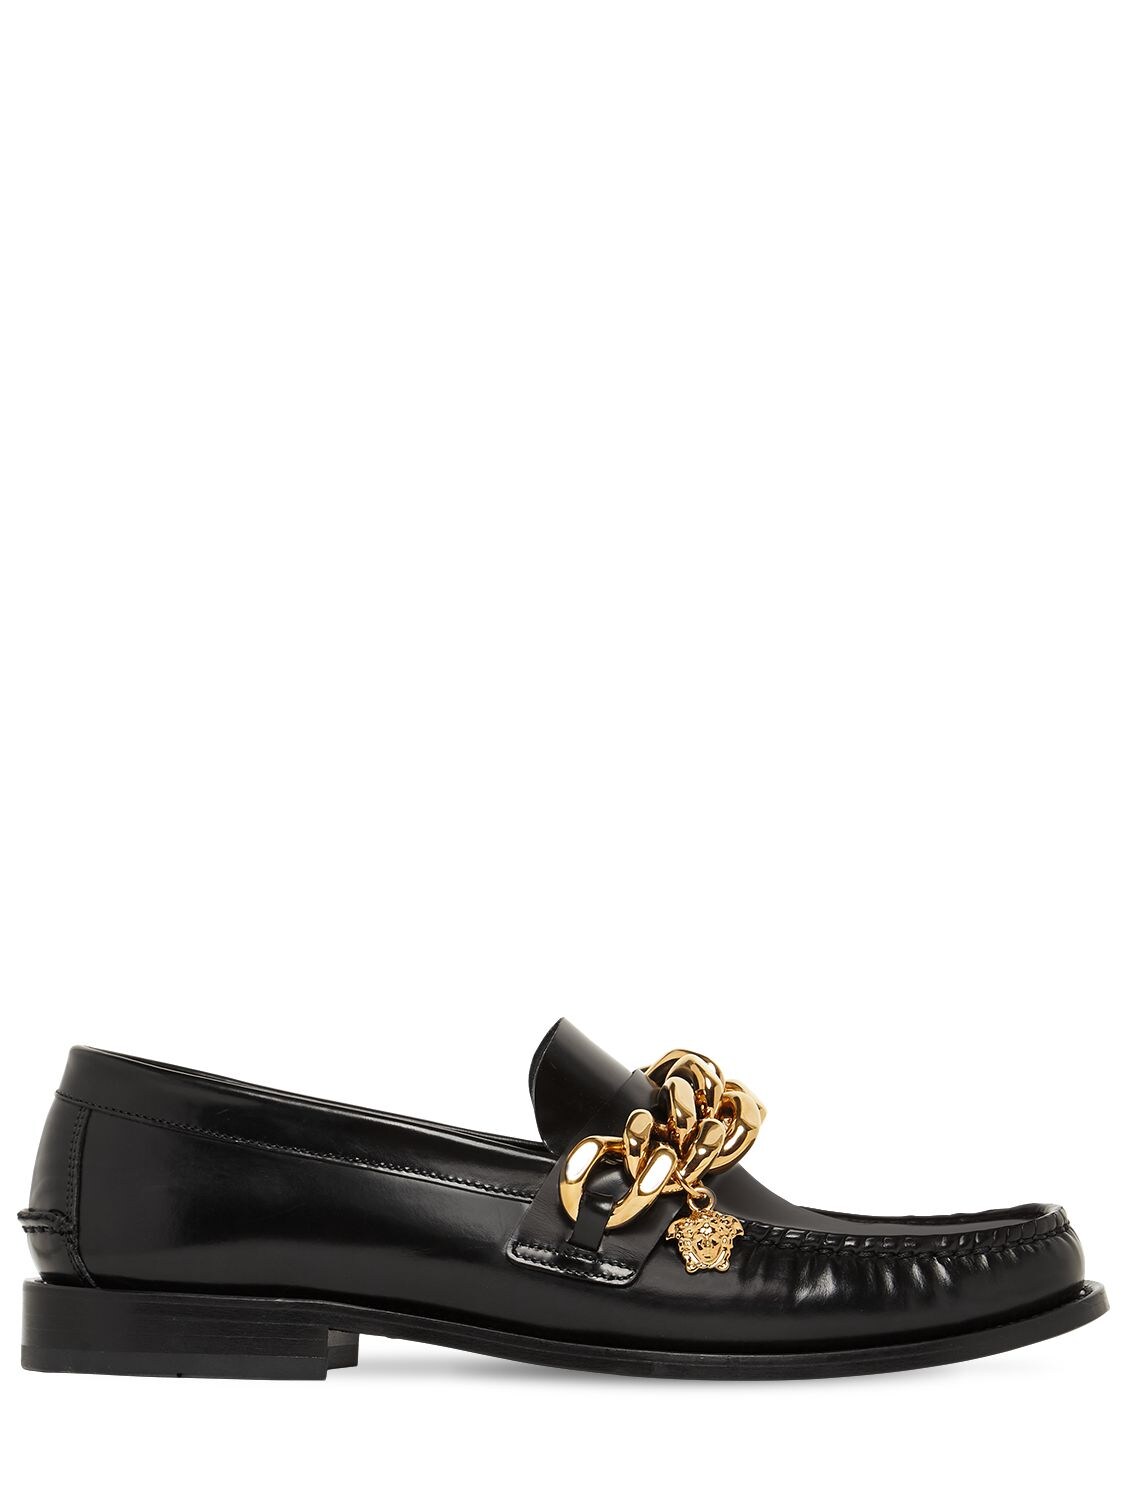 VERSACE LEATHER LOAFERS W/ CHAIN,73IJS2004-S1ZPNDE1